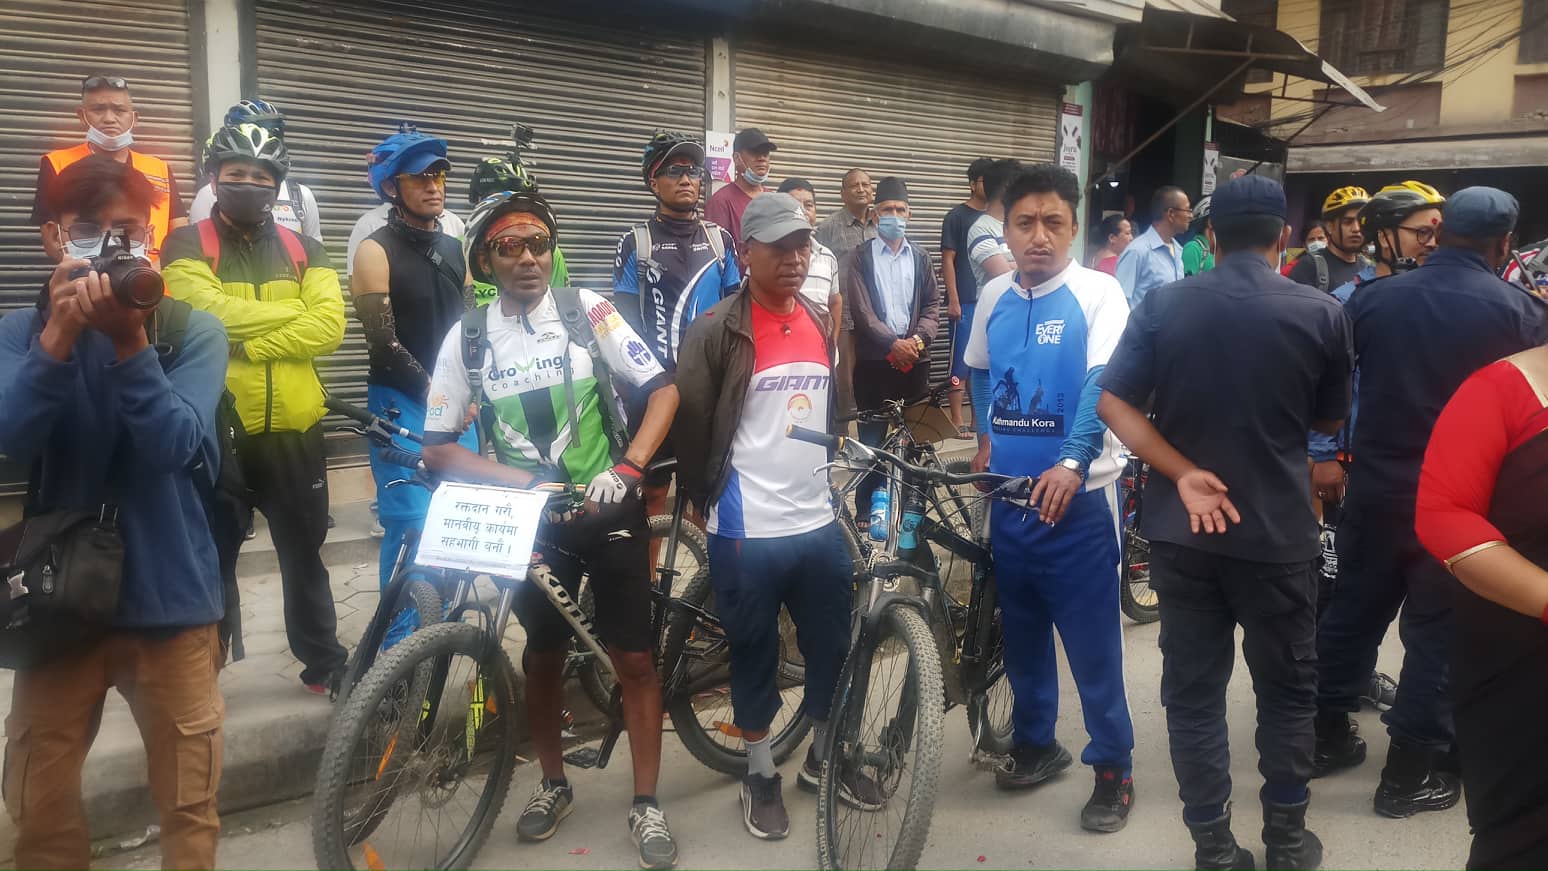 Cycle rally organized to raise public awareness about blood donation